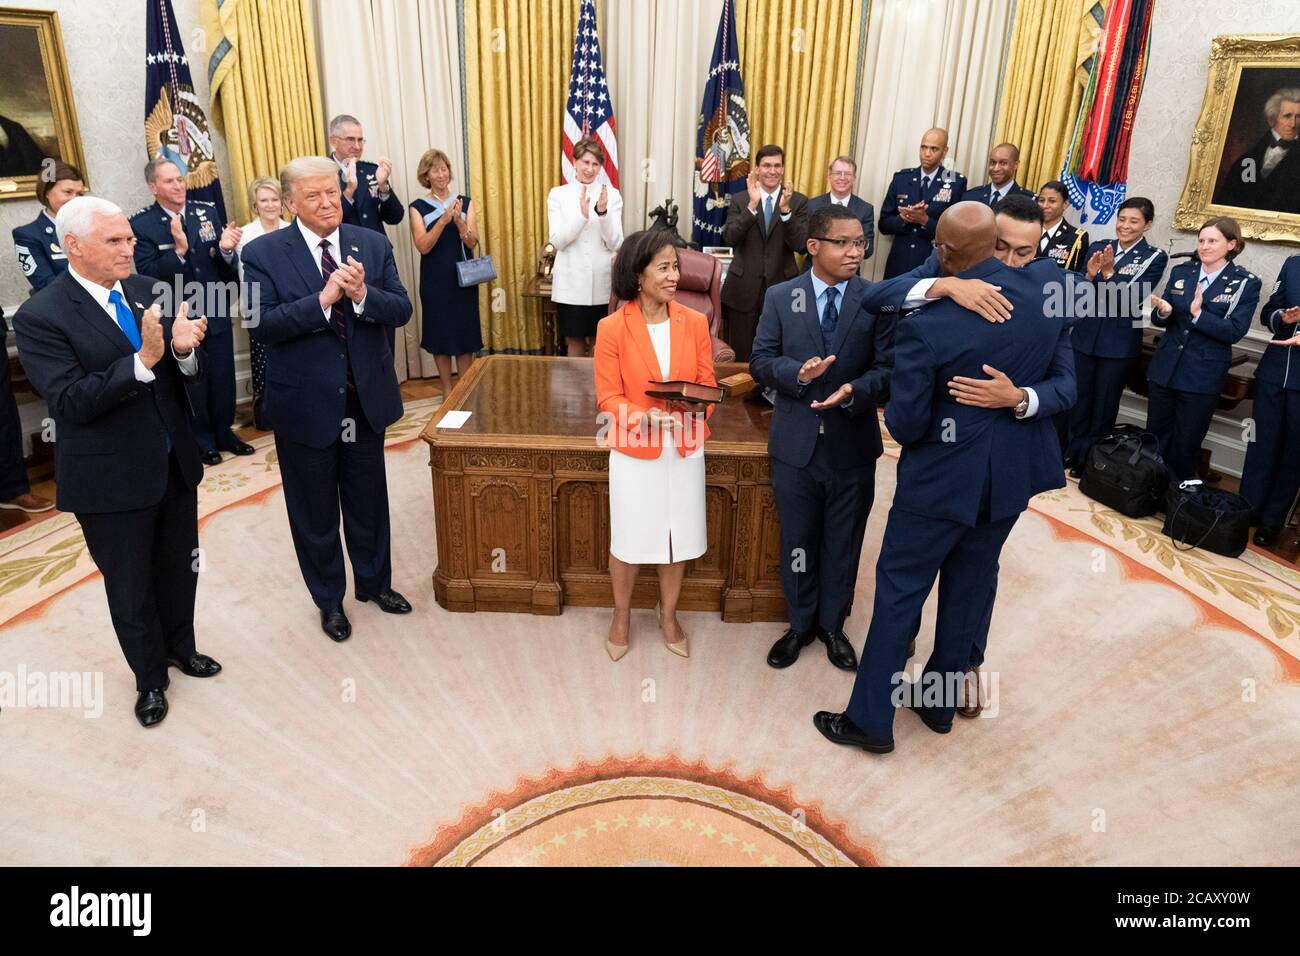 U.S. Air Force General Charles Q. Brown, is embraced by his son after being sworn in as the new Air Force Chief of Staff in the Oval Office Room of the White House August 4, 2020 in Washington, DC. Stock Photo